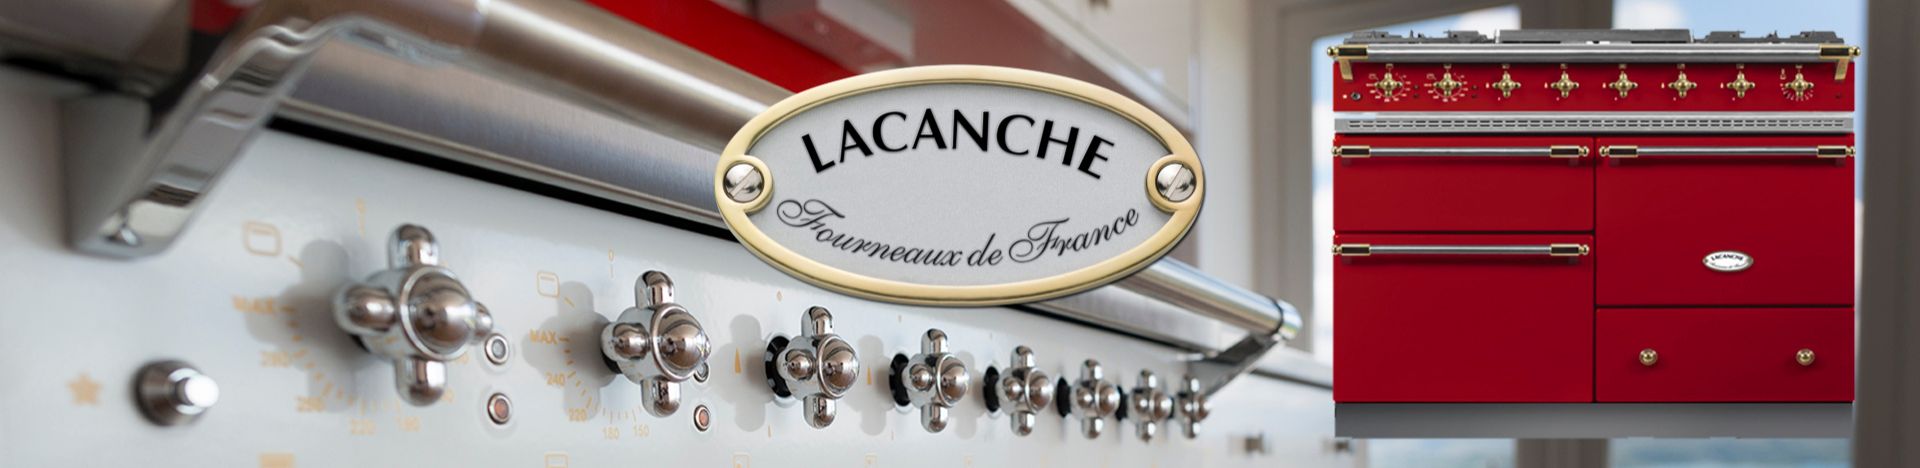 Lacanche Cookers